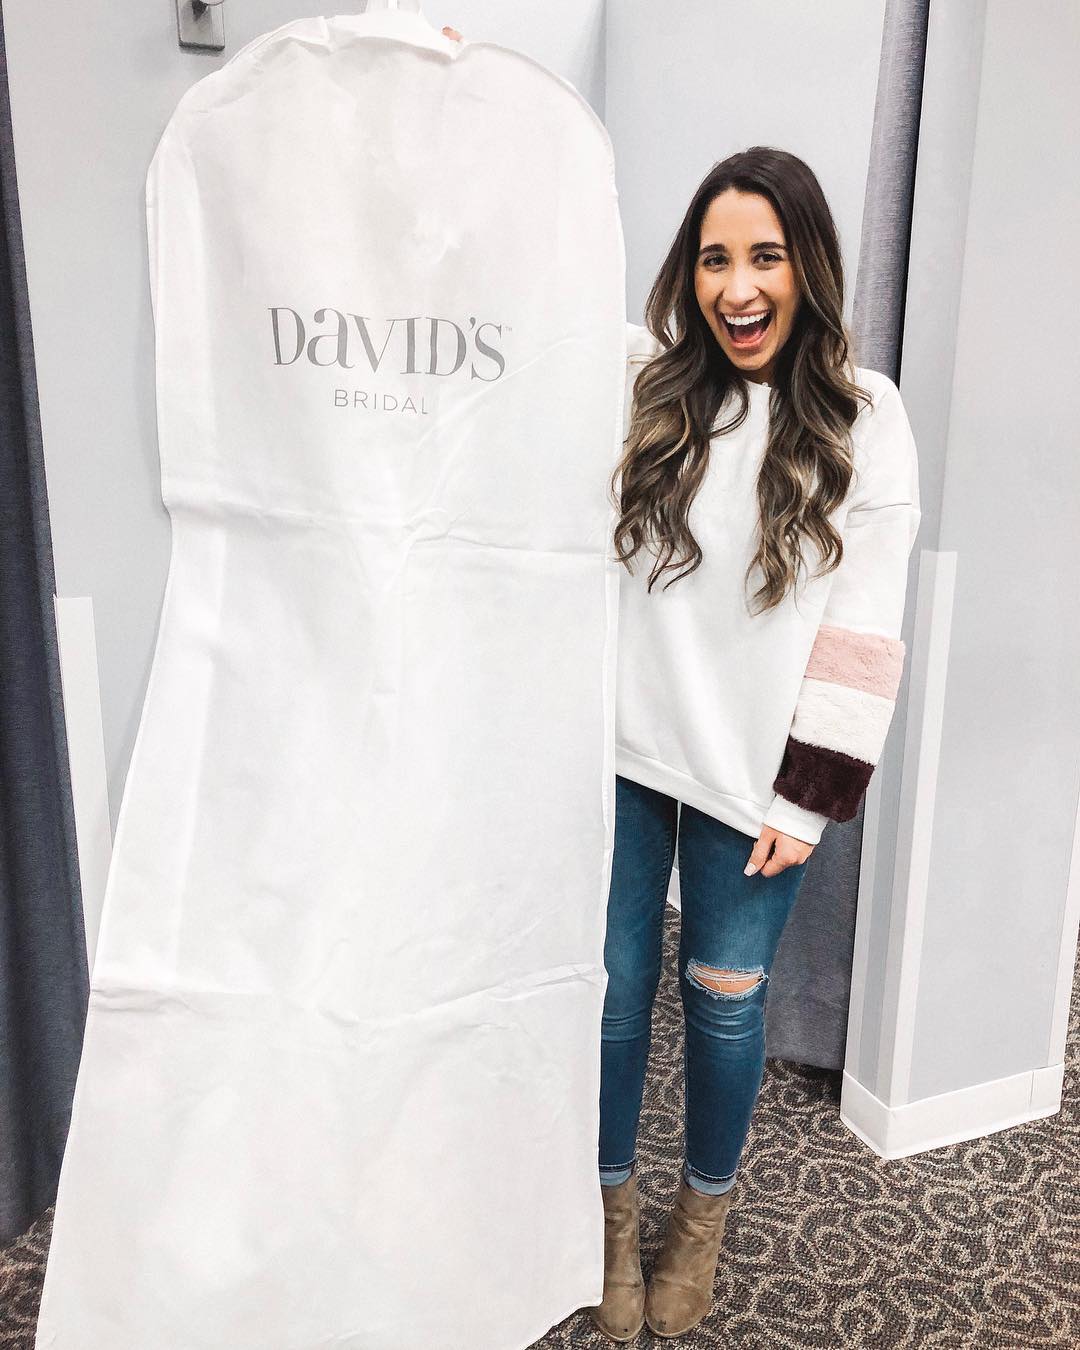 19 Wedding Gown Garment Bags Perfect for Your Big Day